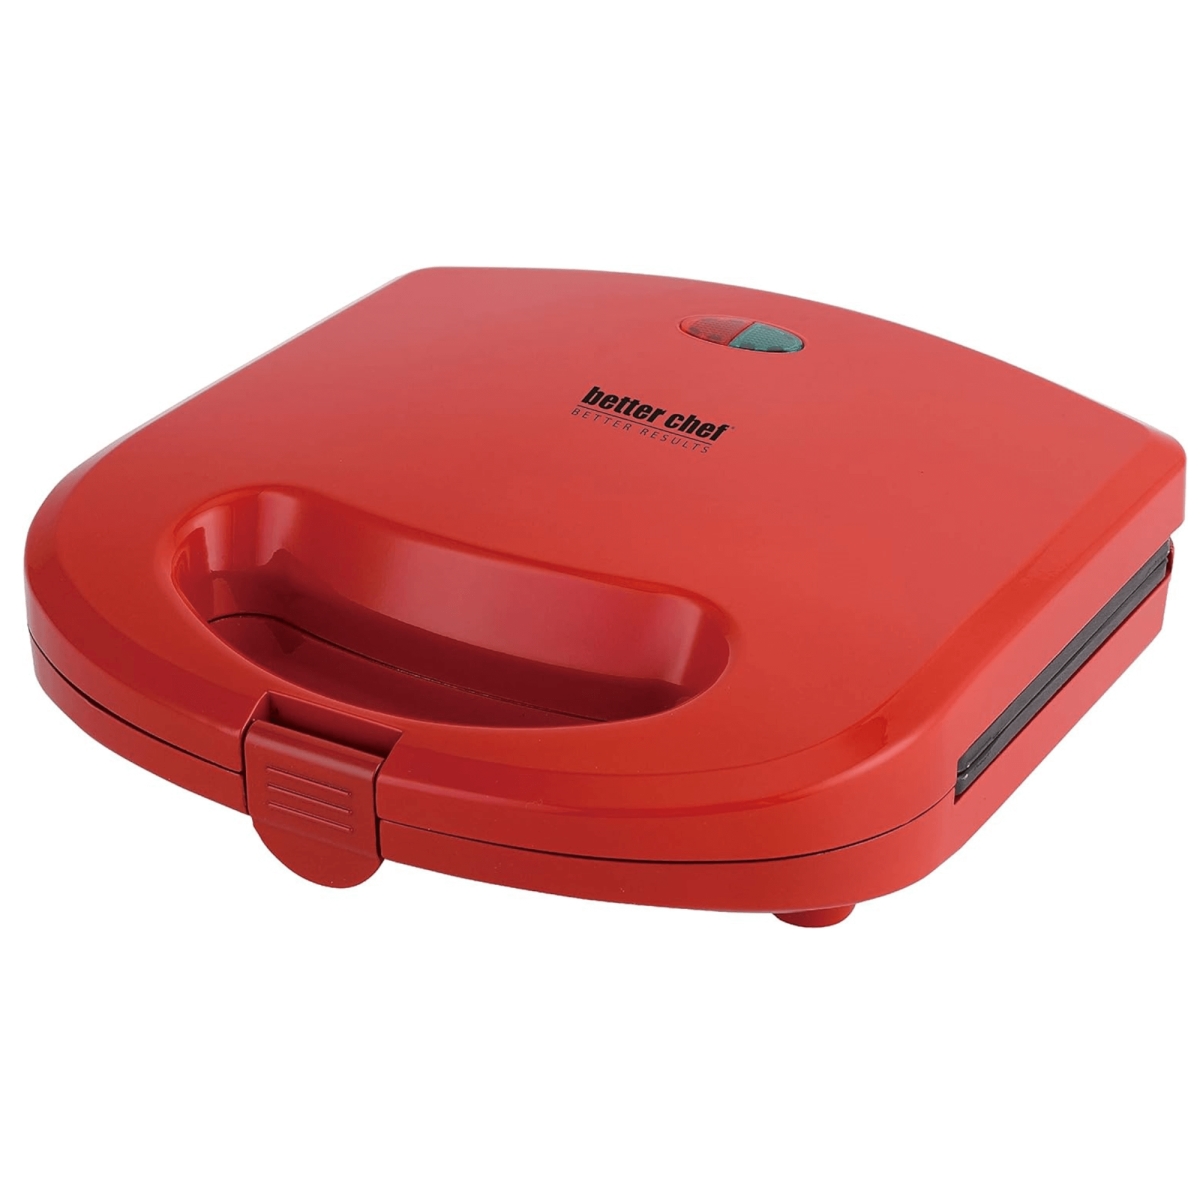 Picture of Better Chef IM-297R-WAFF-CP Better Chef Non-Stick Electric Waffle Maker - Red